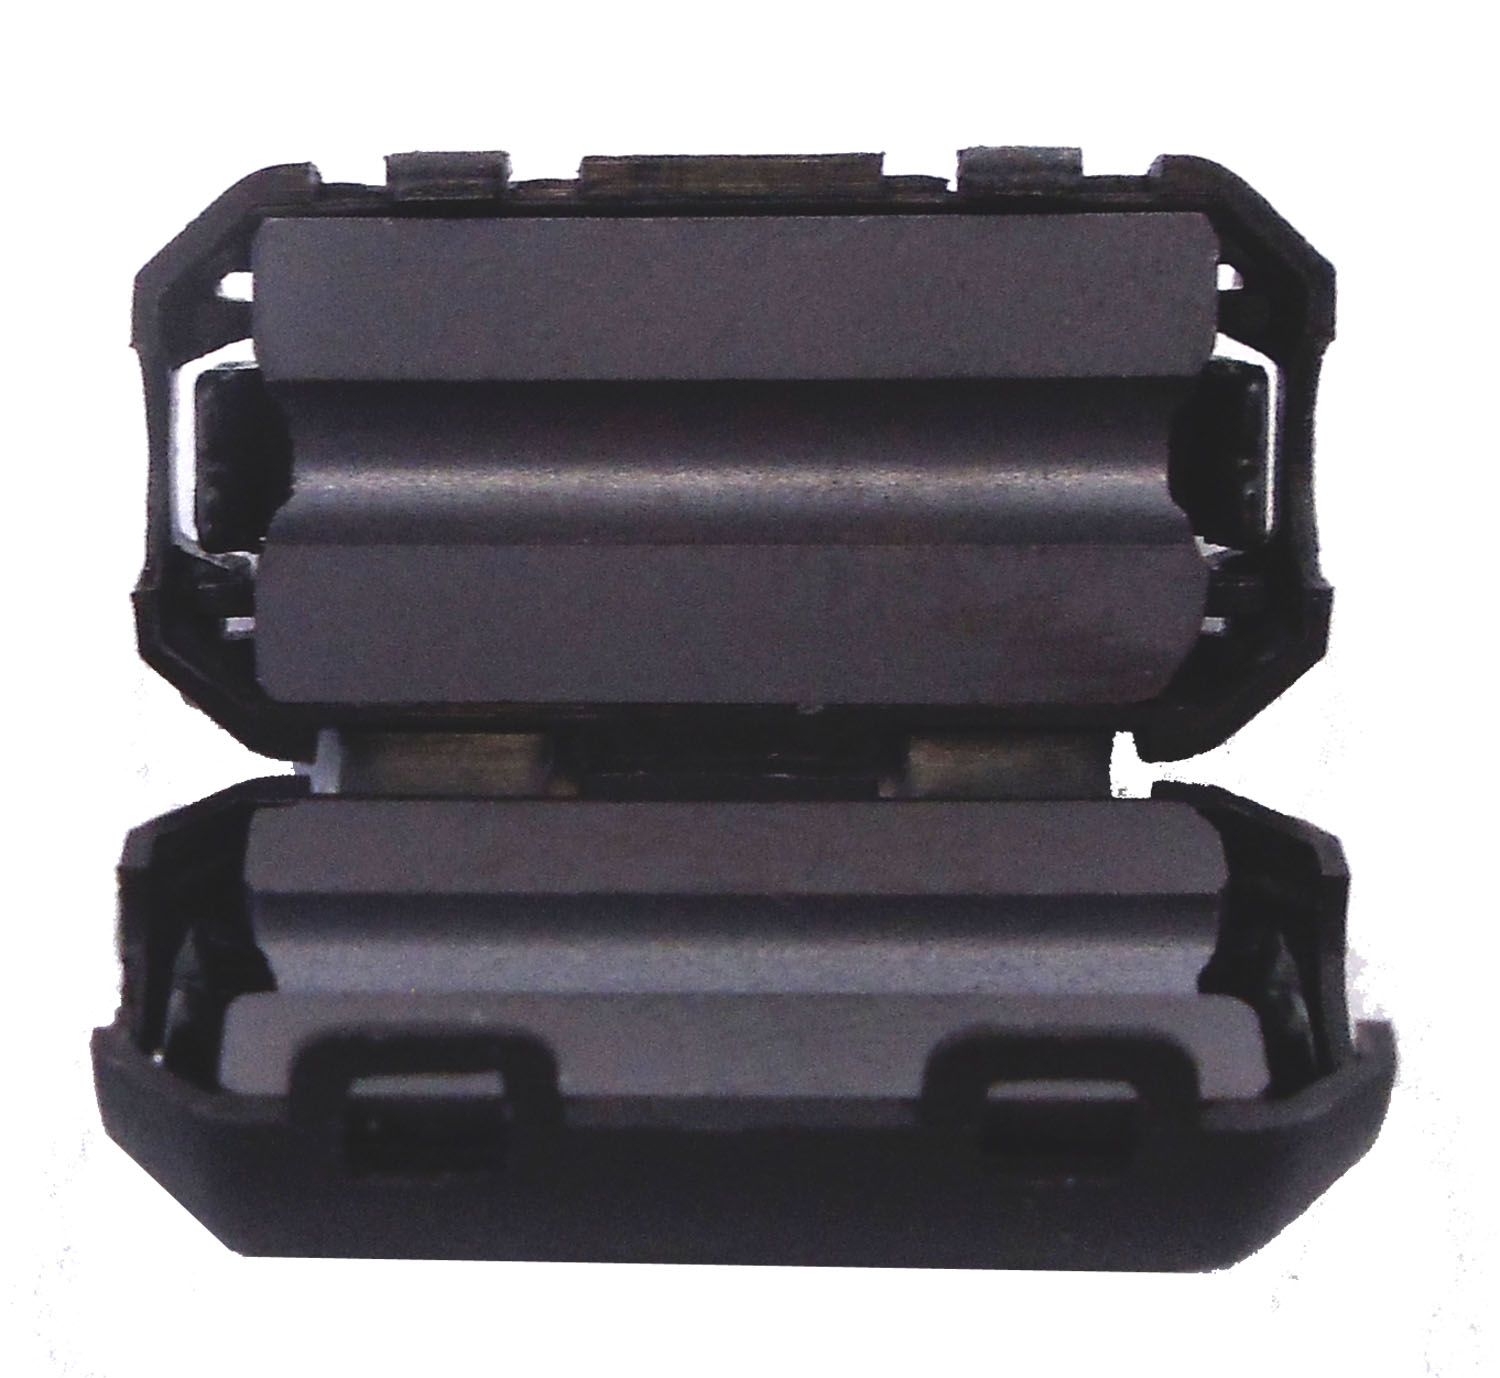 3.5MM SNAP FERRITE CORE NOISE SUPPRESOR FOR UP TO 10 GAUGE WIRE